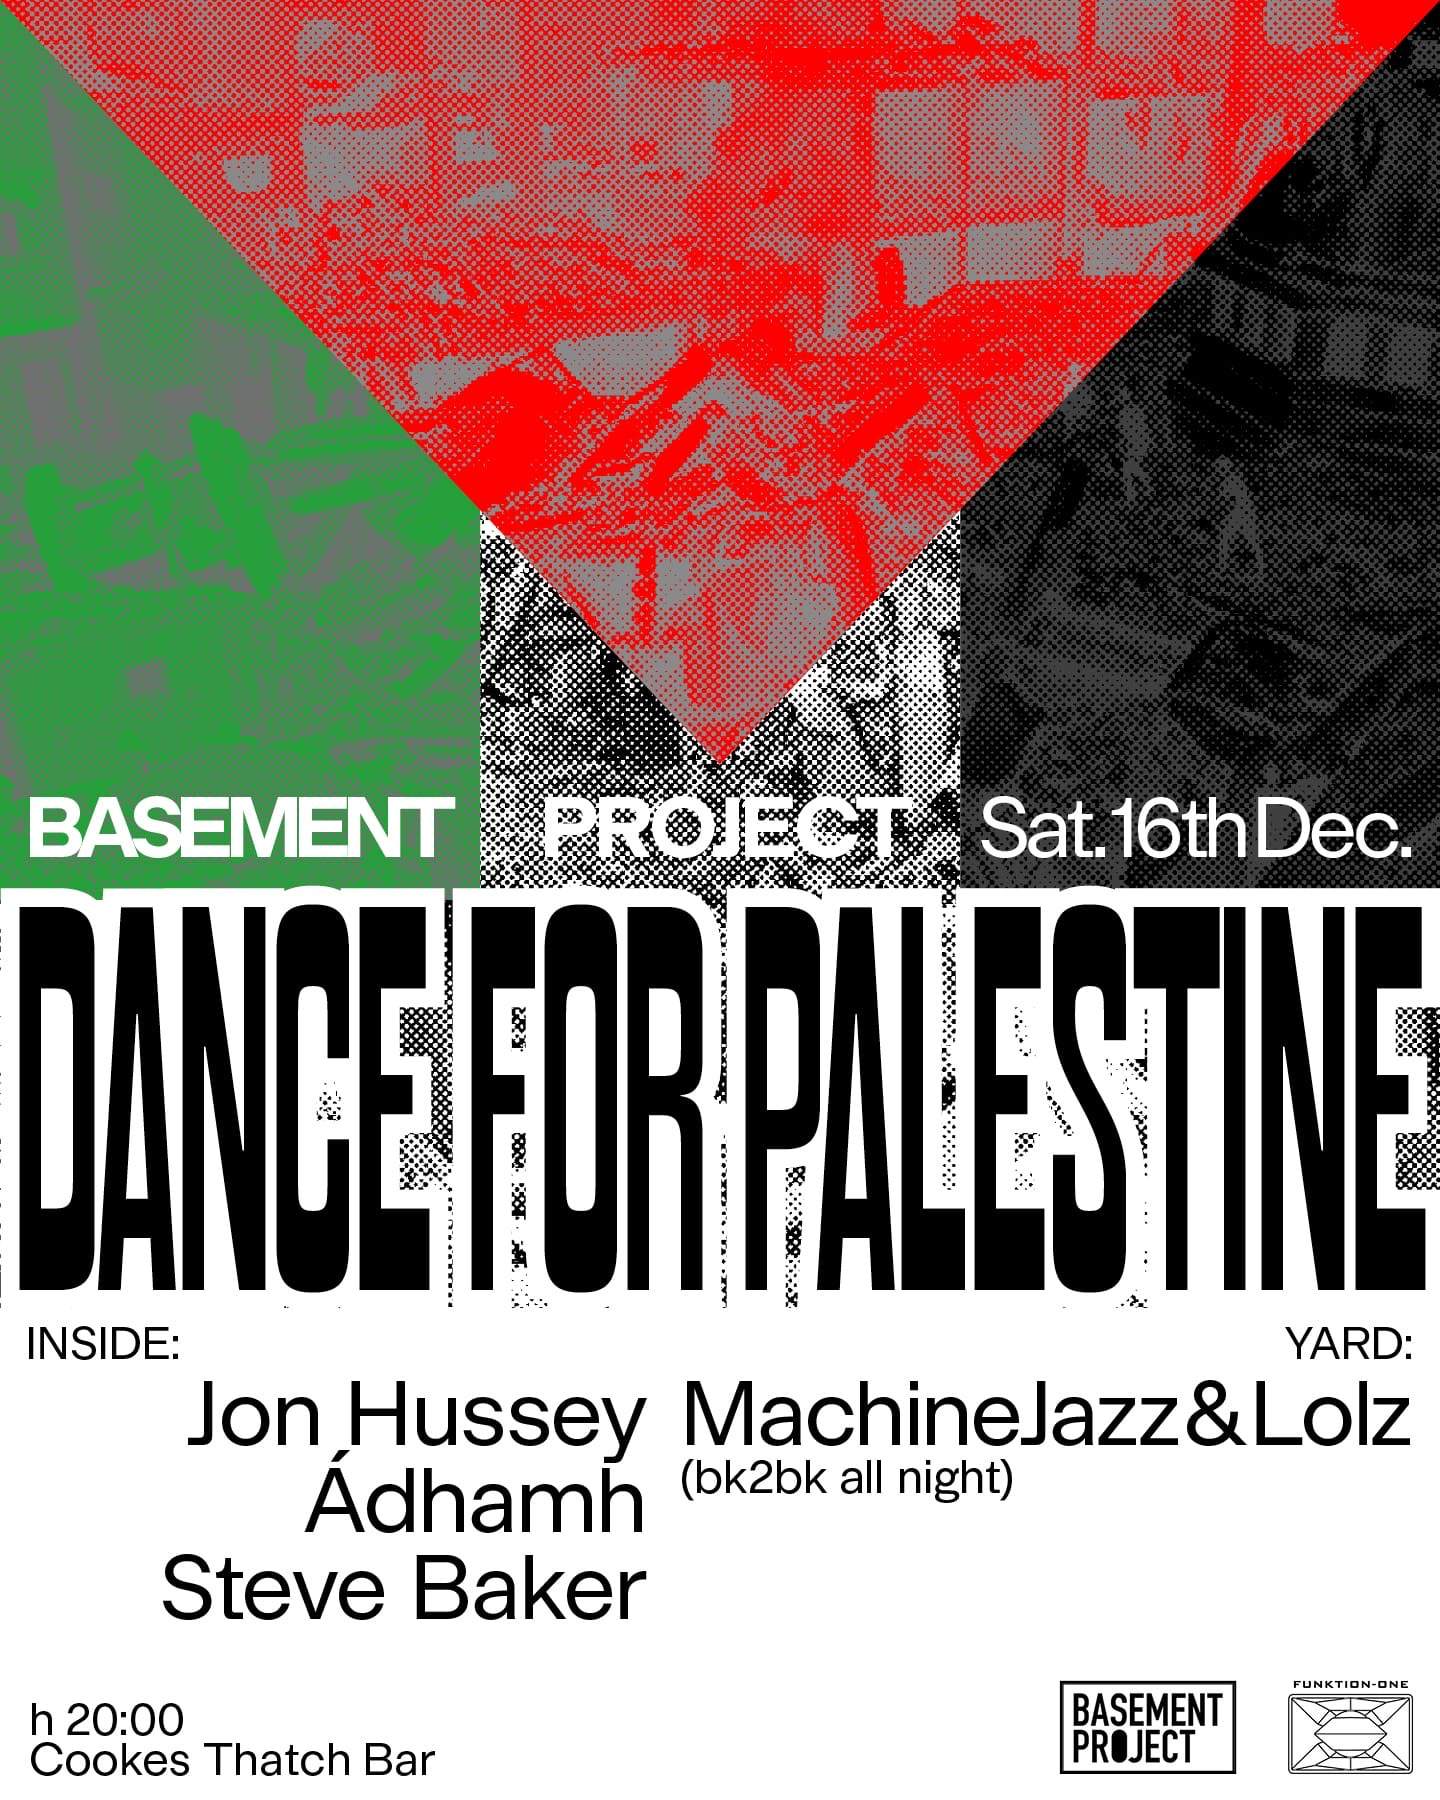 Basement Project in aid of the Palestinian Children's Relief Fund - Página frontal